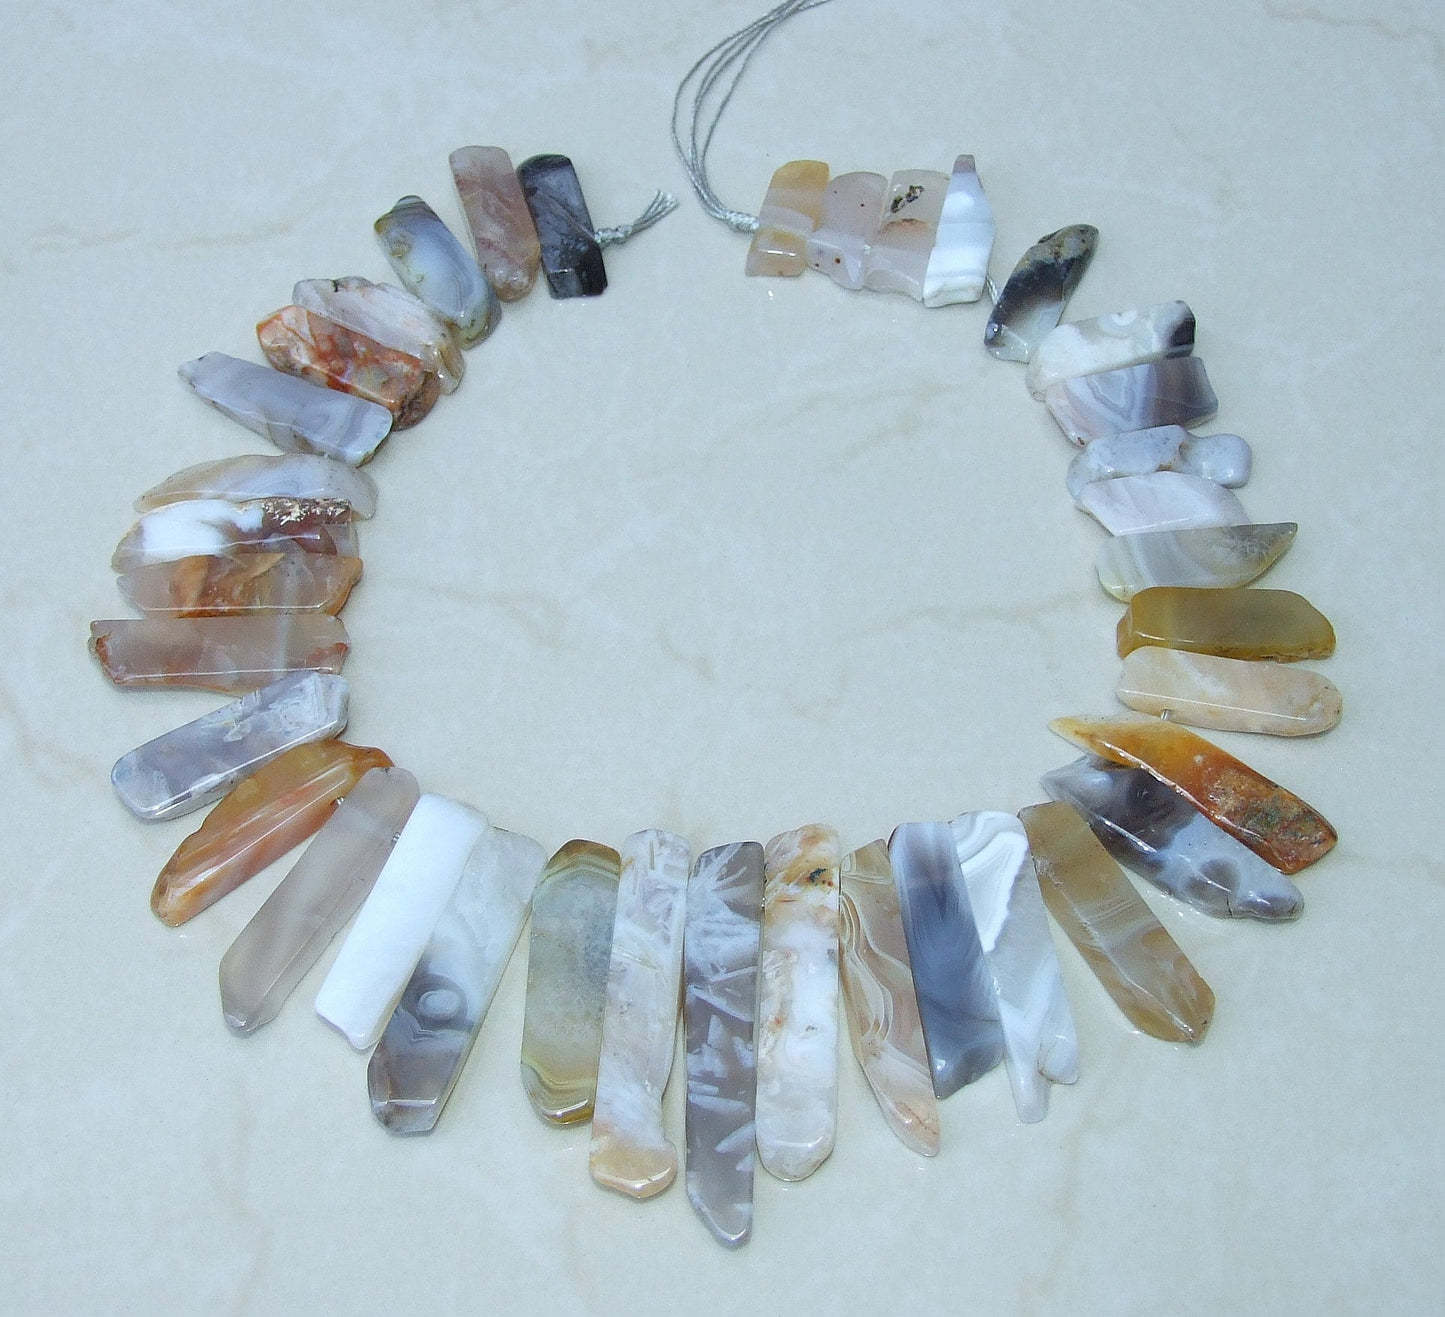 Natural Agate Slice, Slab, Stick, Teeth, Graduated Natural Agate, Gemstone Beads, Highly Polished, Jewelry Stones, Half Strand, 20mm - 45+mm